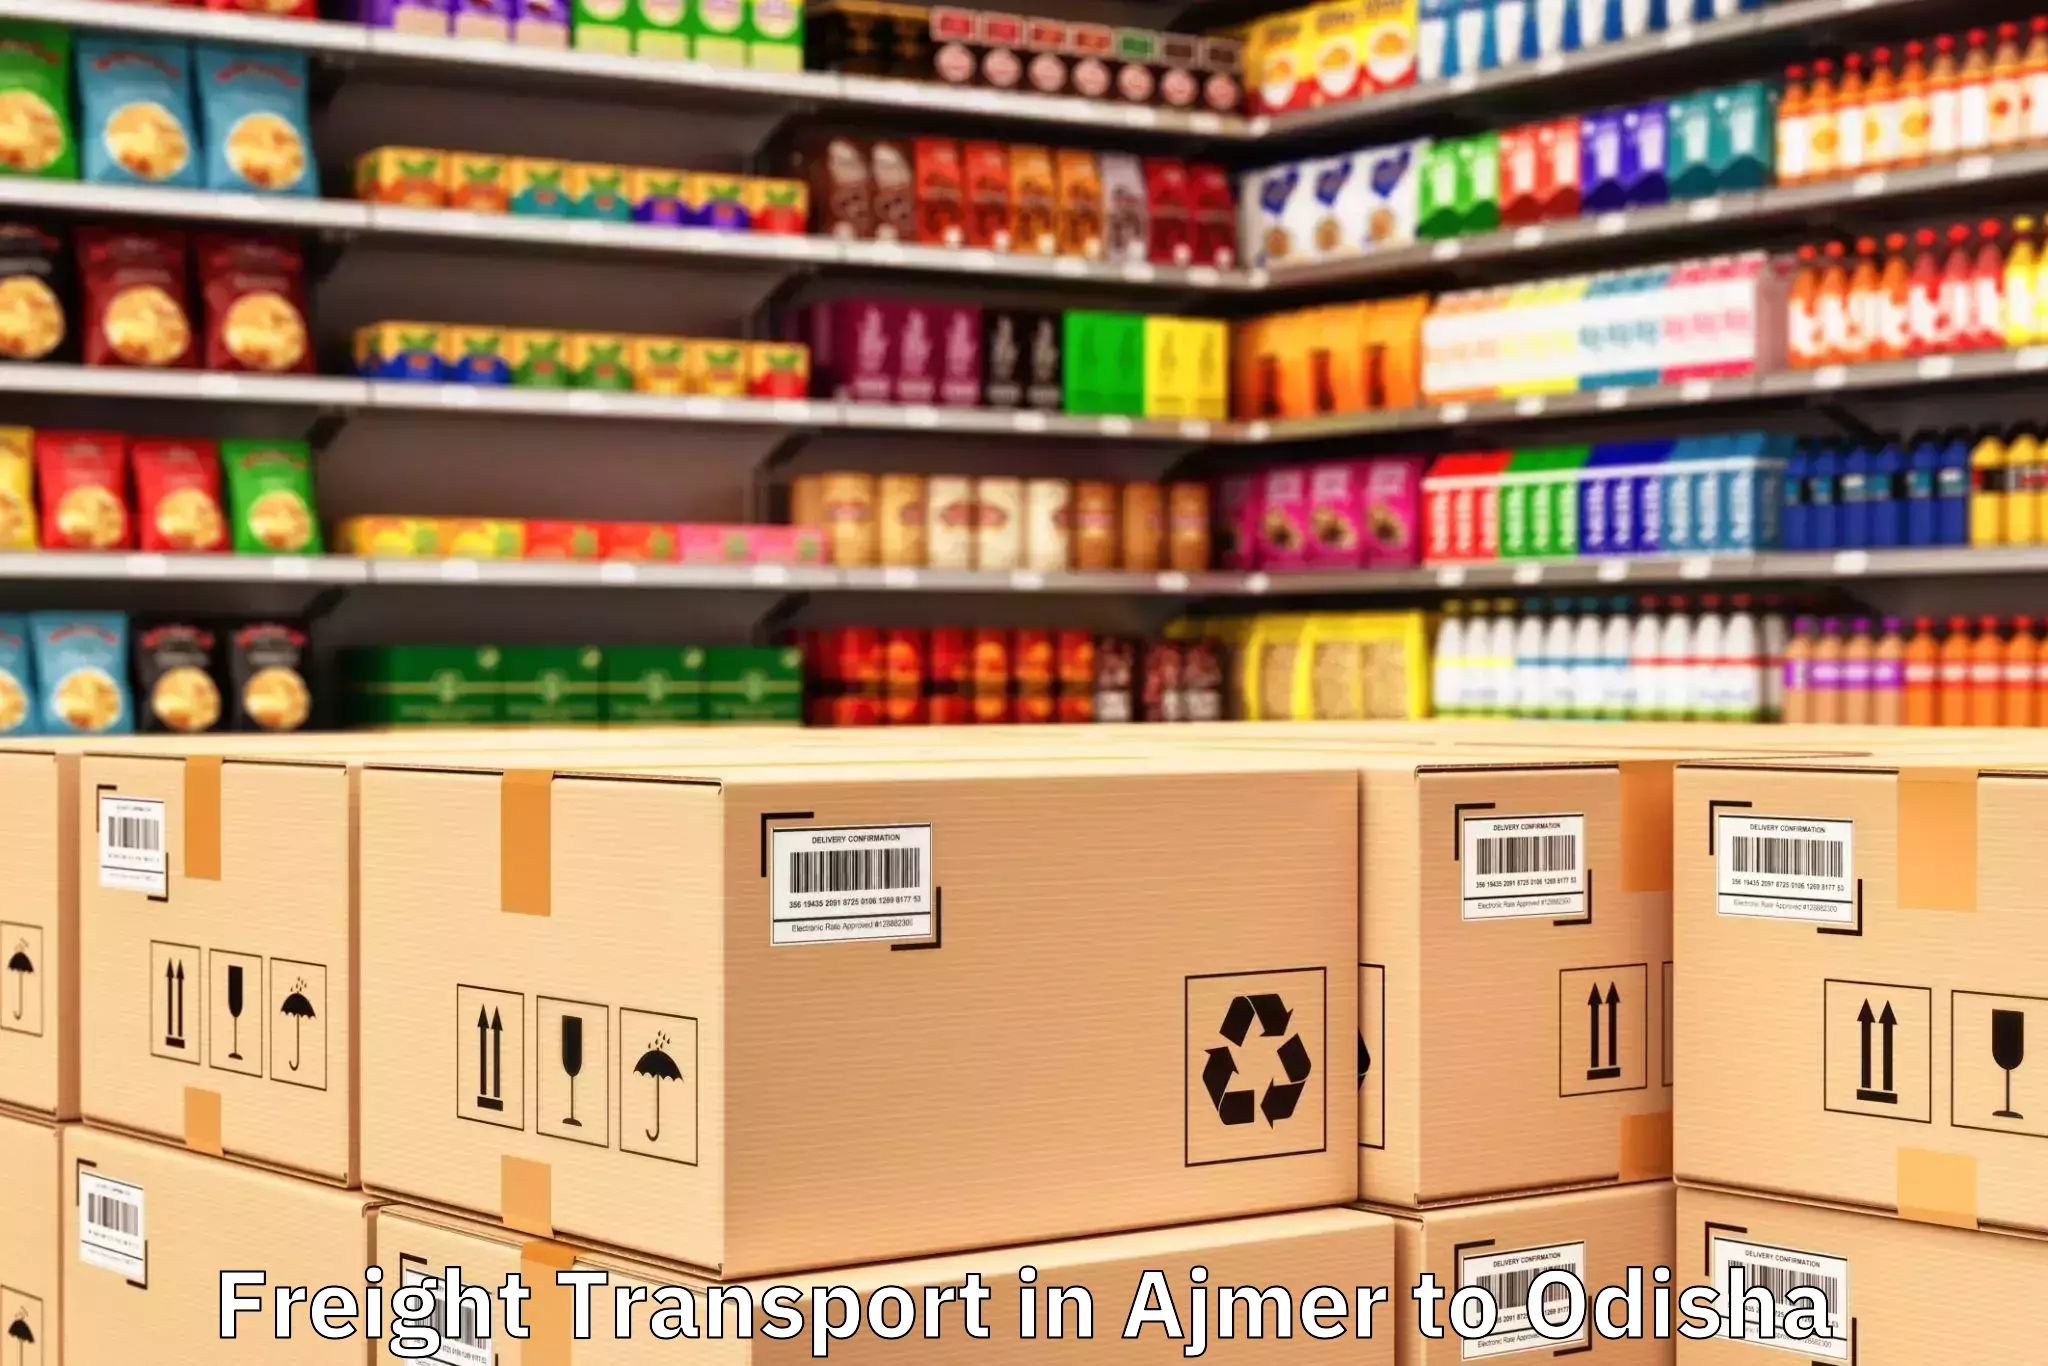 Trusted Ajmer to Bhubaneswar 1 Mall Freight Transport